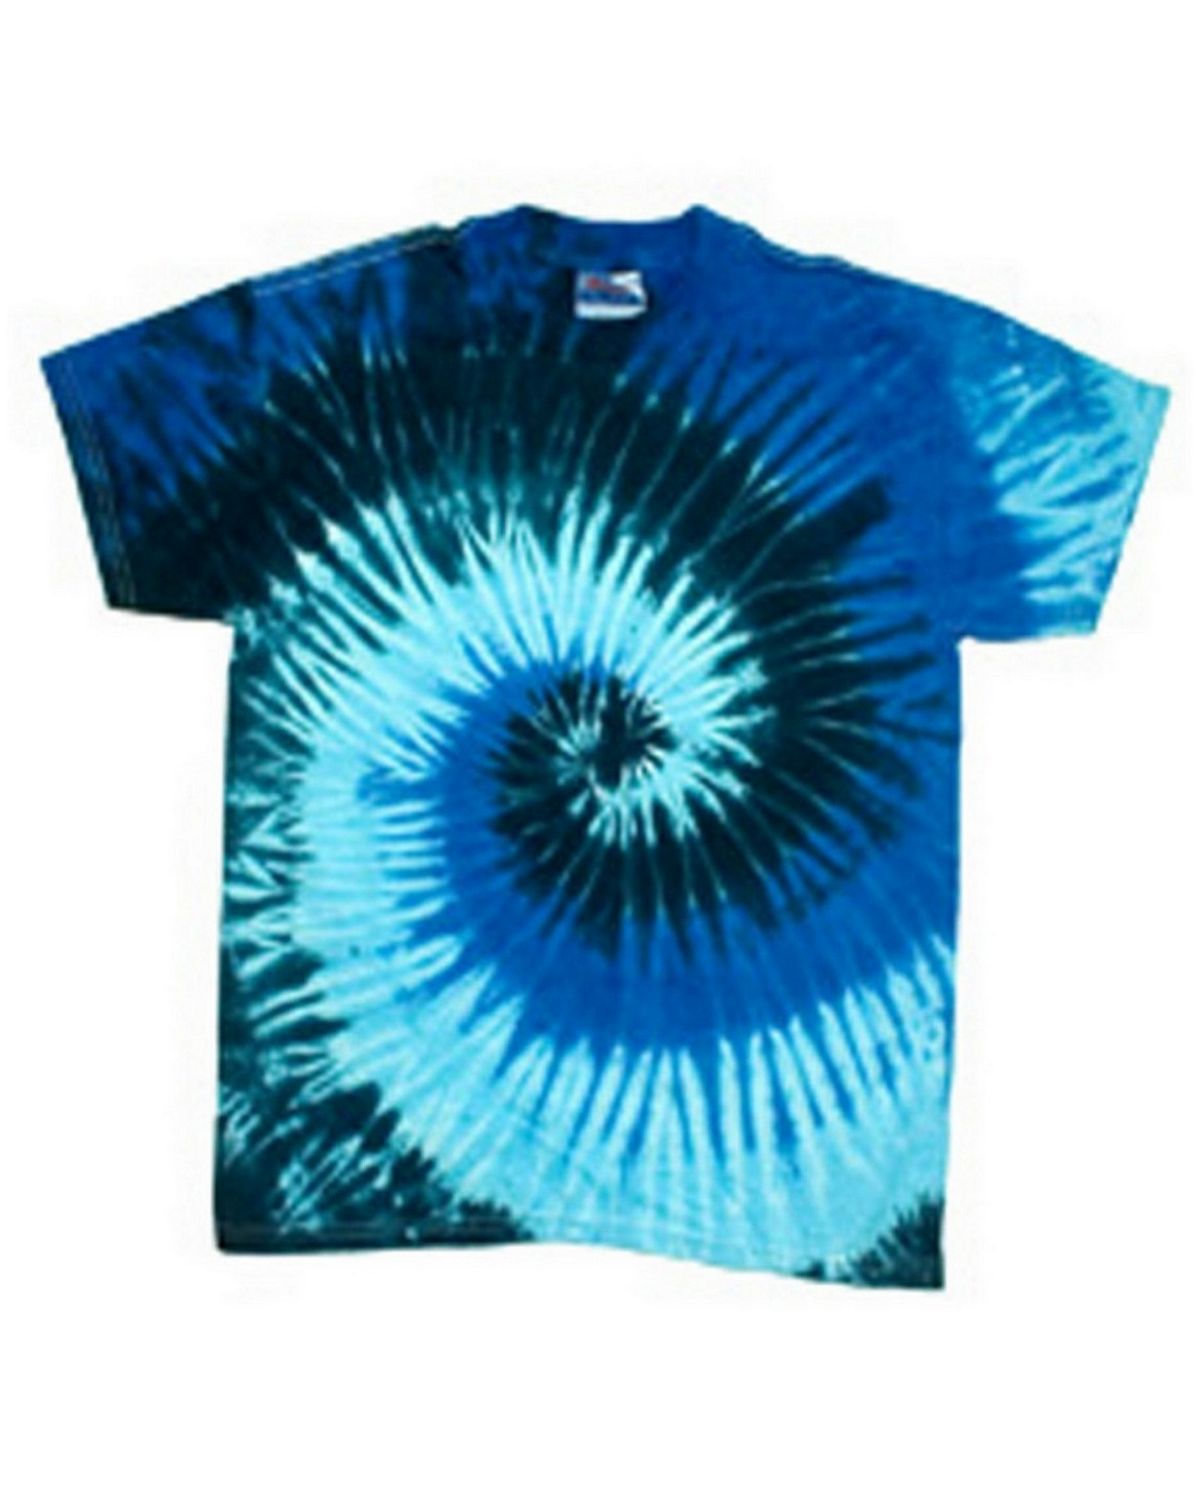 Tie-Dye CD100Y Youth 100% Cotton Tie-Dyed T-shirt - ApparelnBags.com